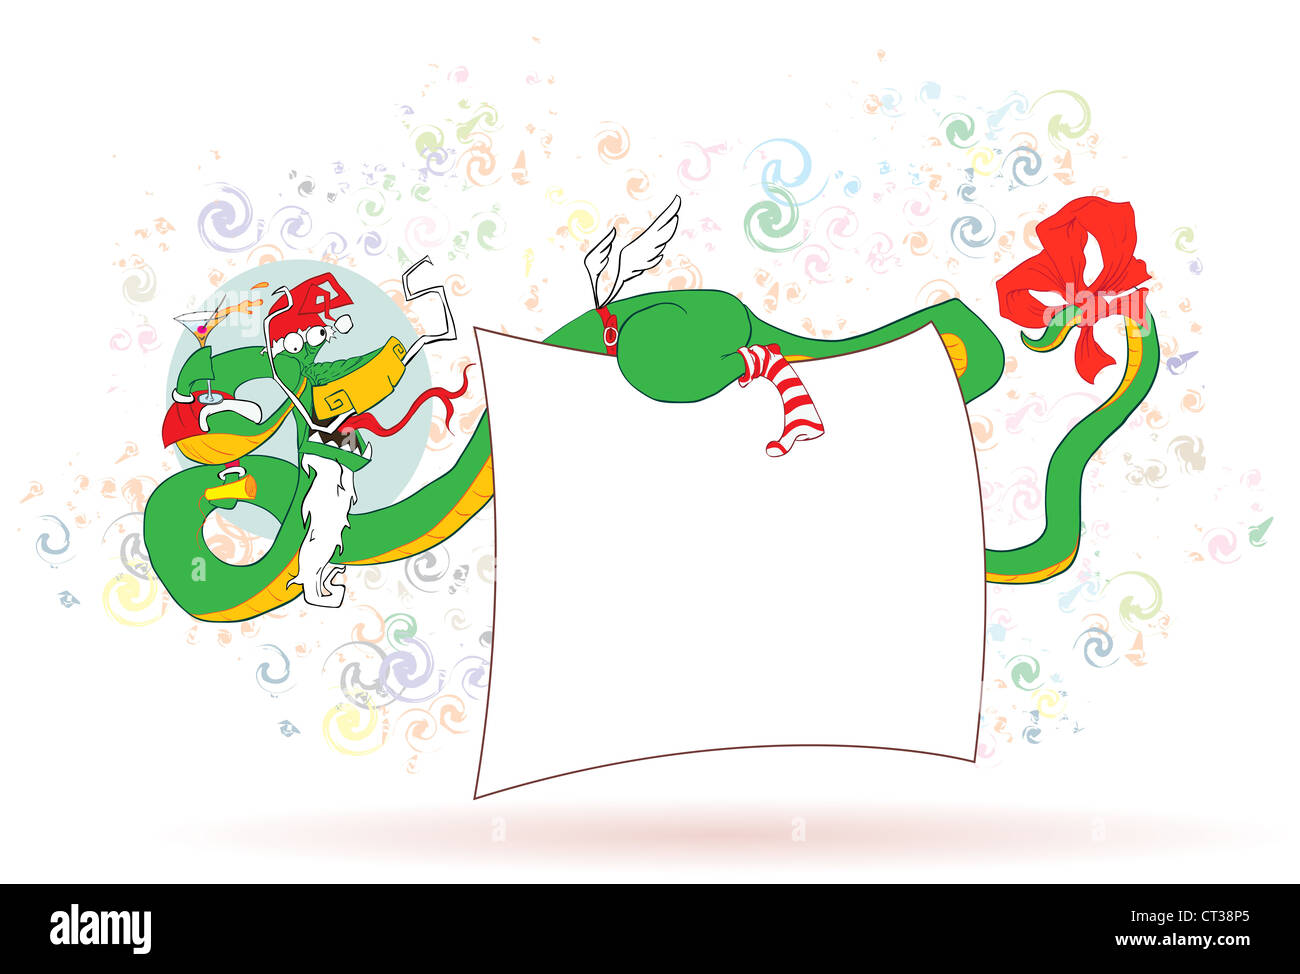 Symbol  dragon, celebrates the new year. Funny vector illustration. (All layers are made for easy editing of illustration.) Stock Photo